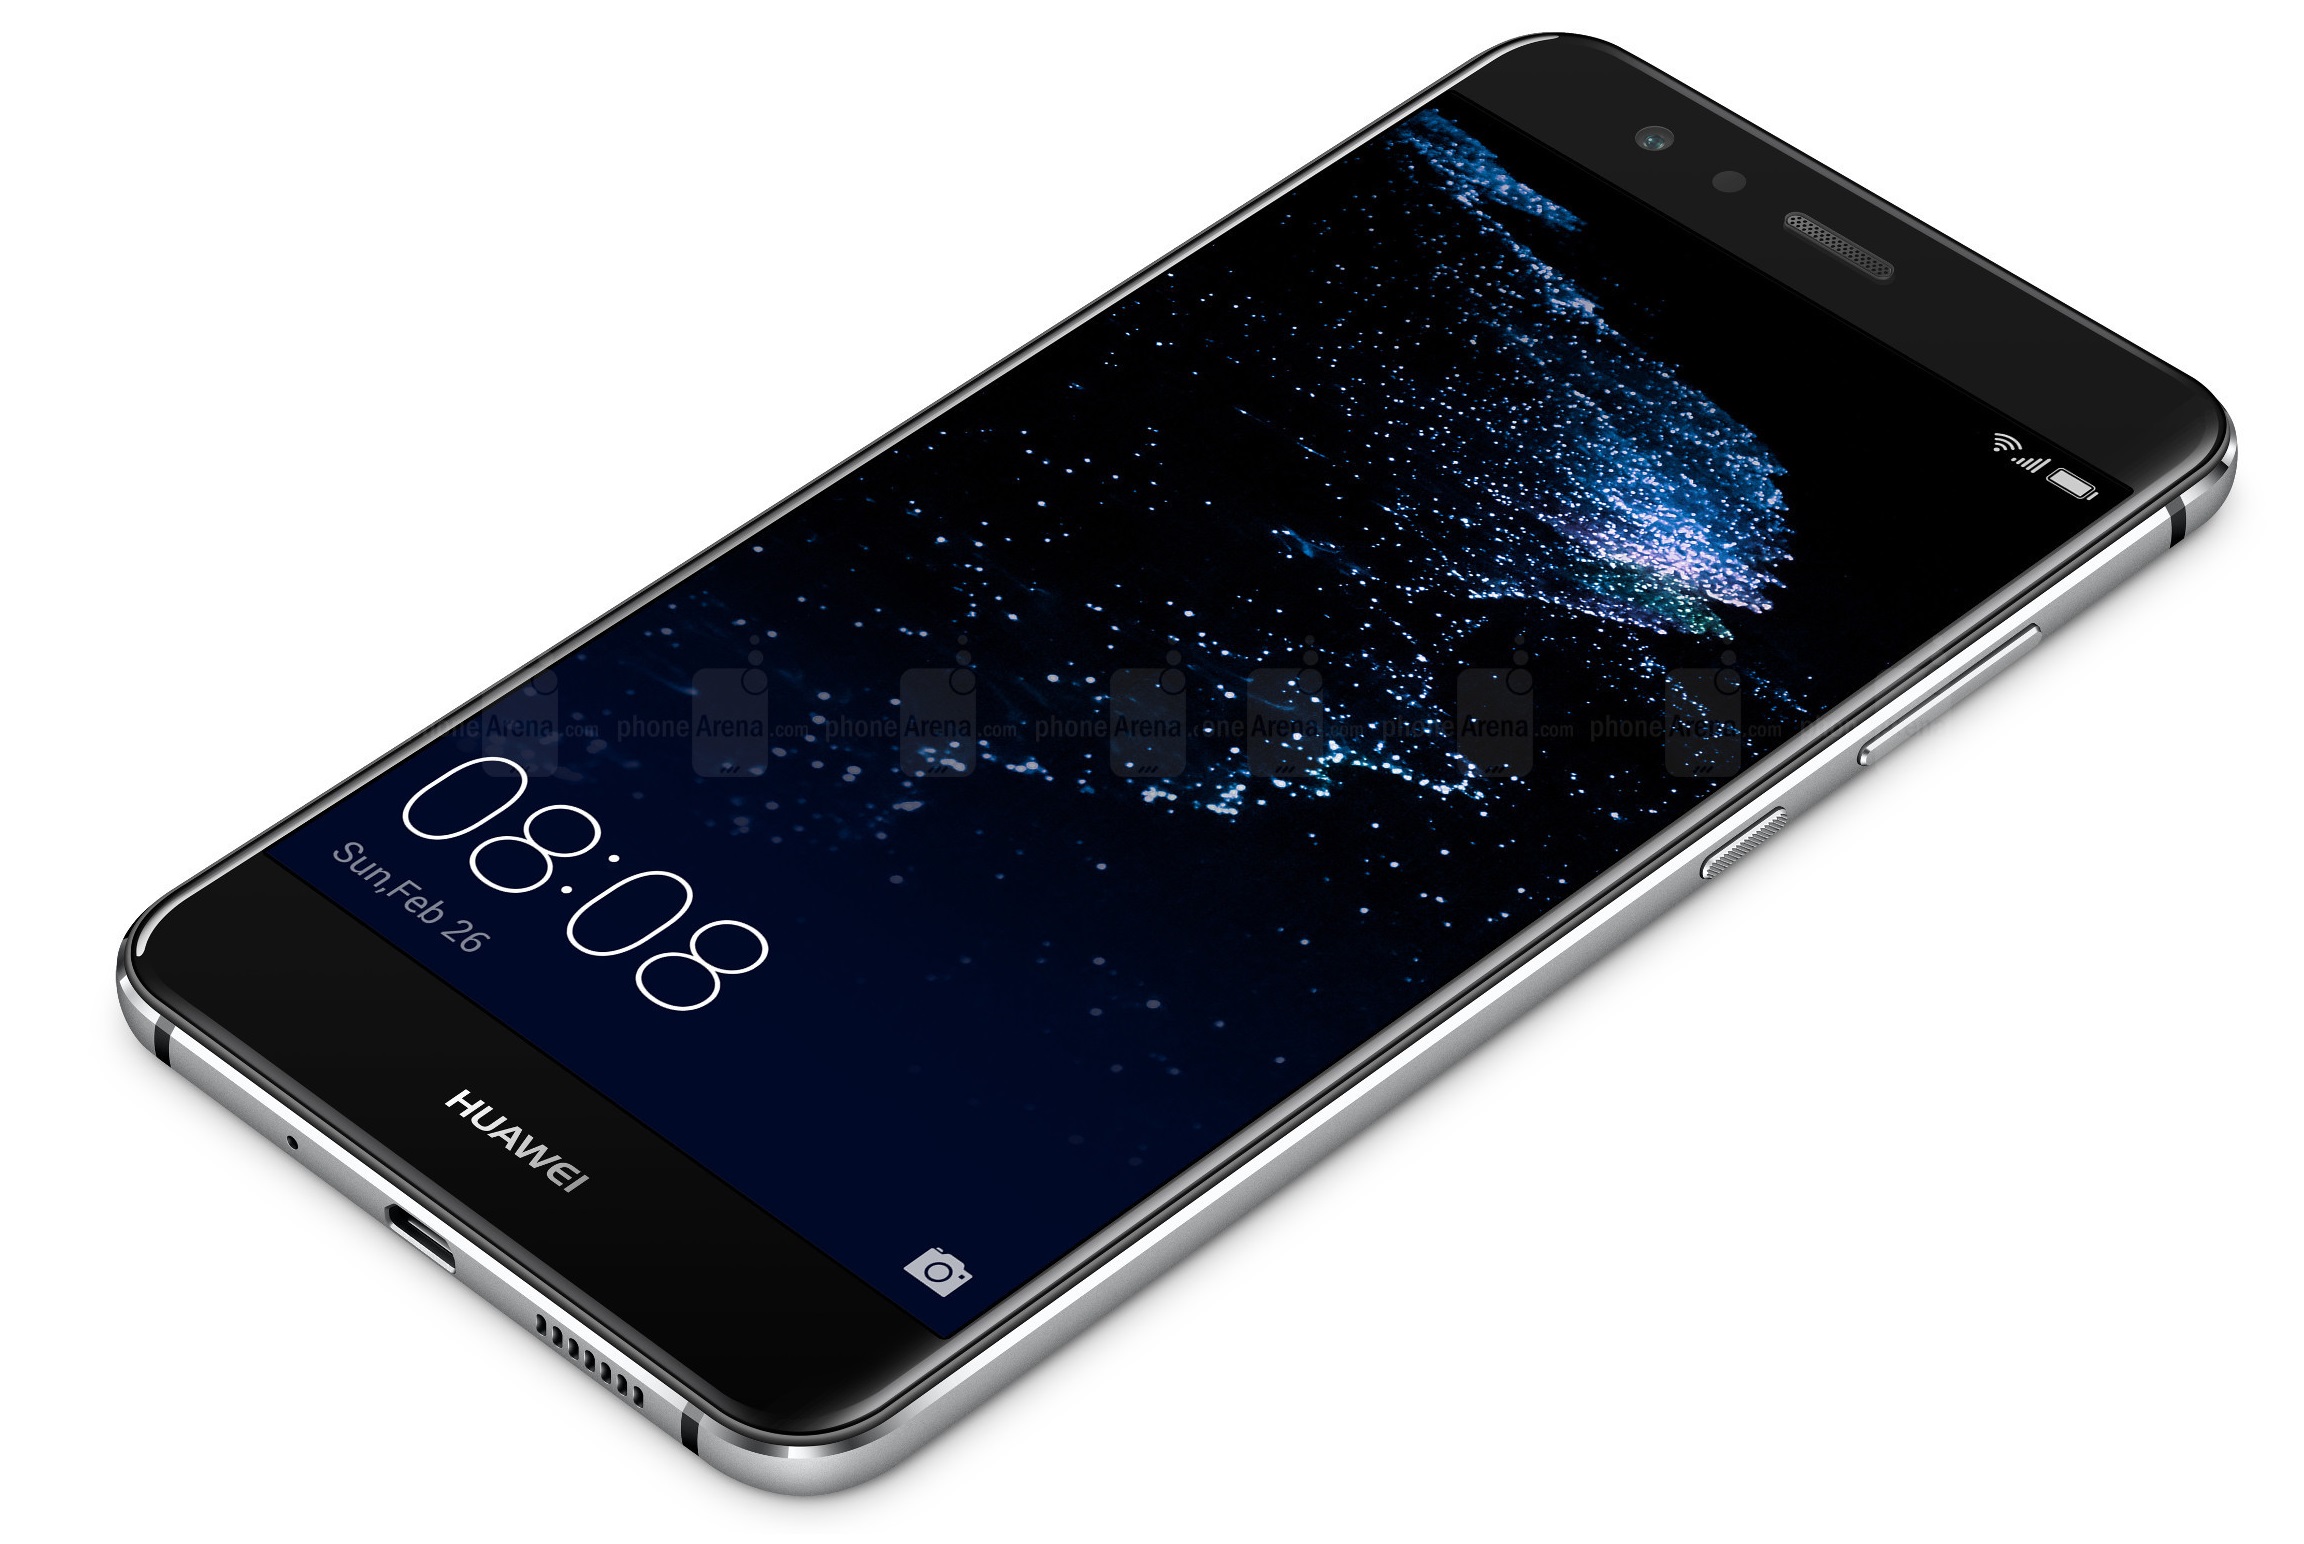 Huawei P10 Lite Launched In UK Priced At GBP 299 (Approx. Rs. 24,000)